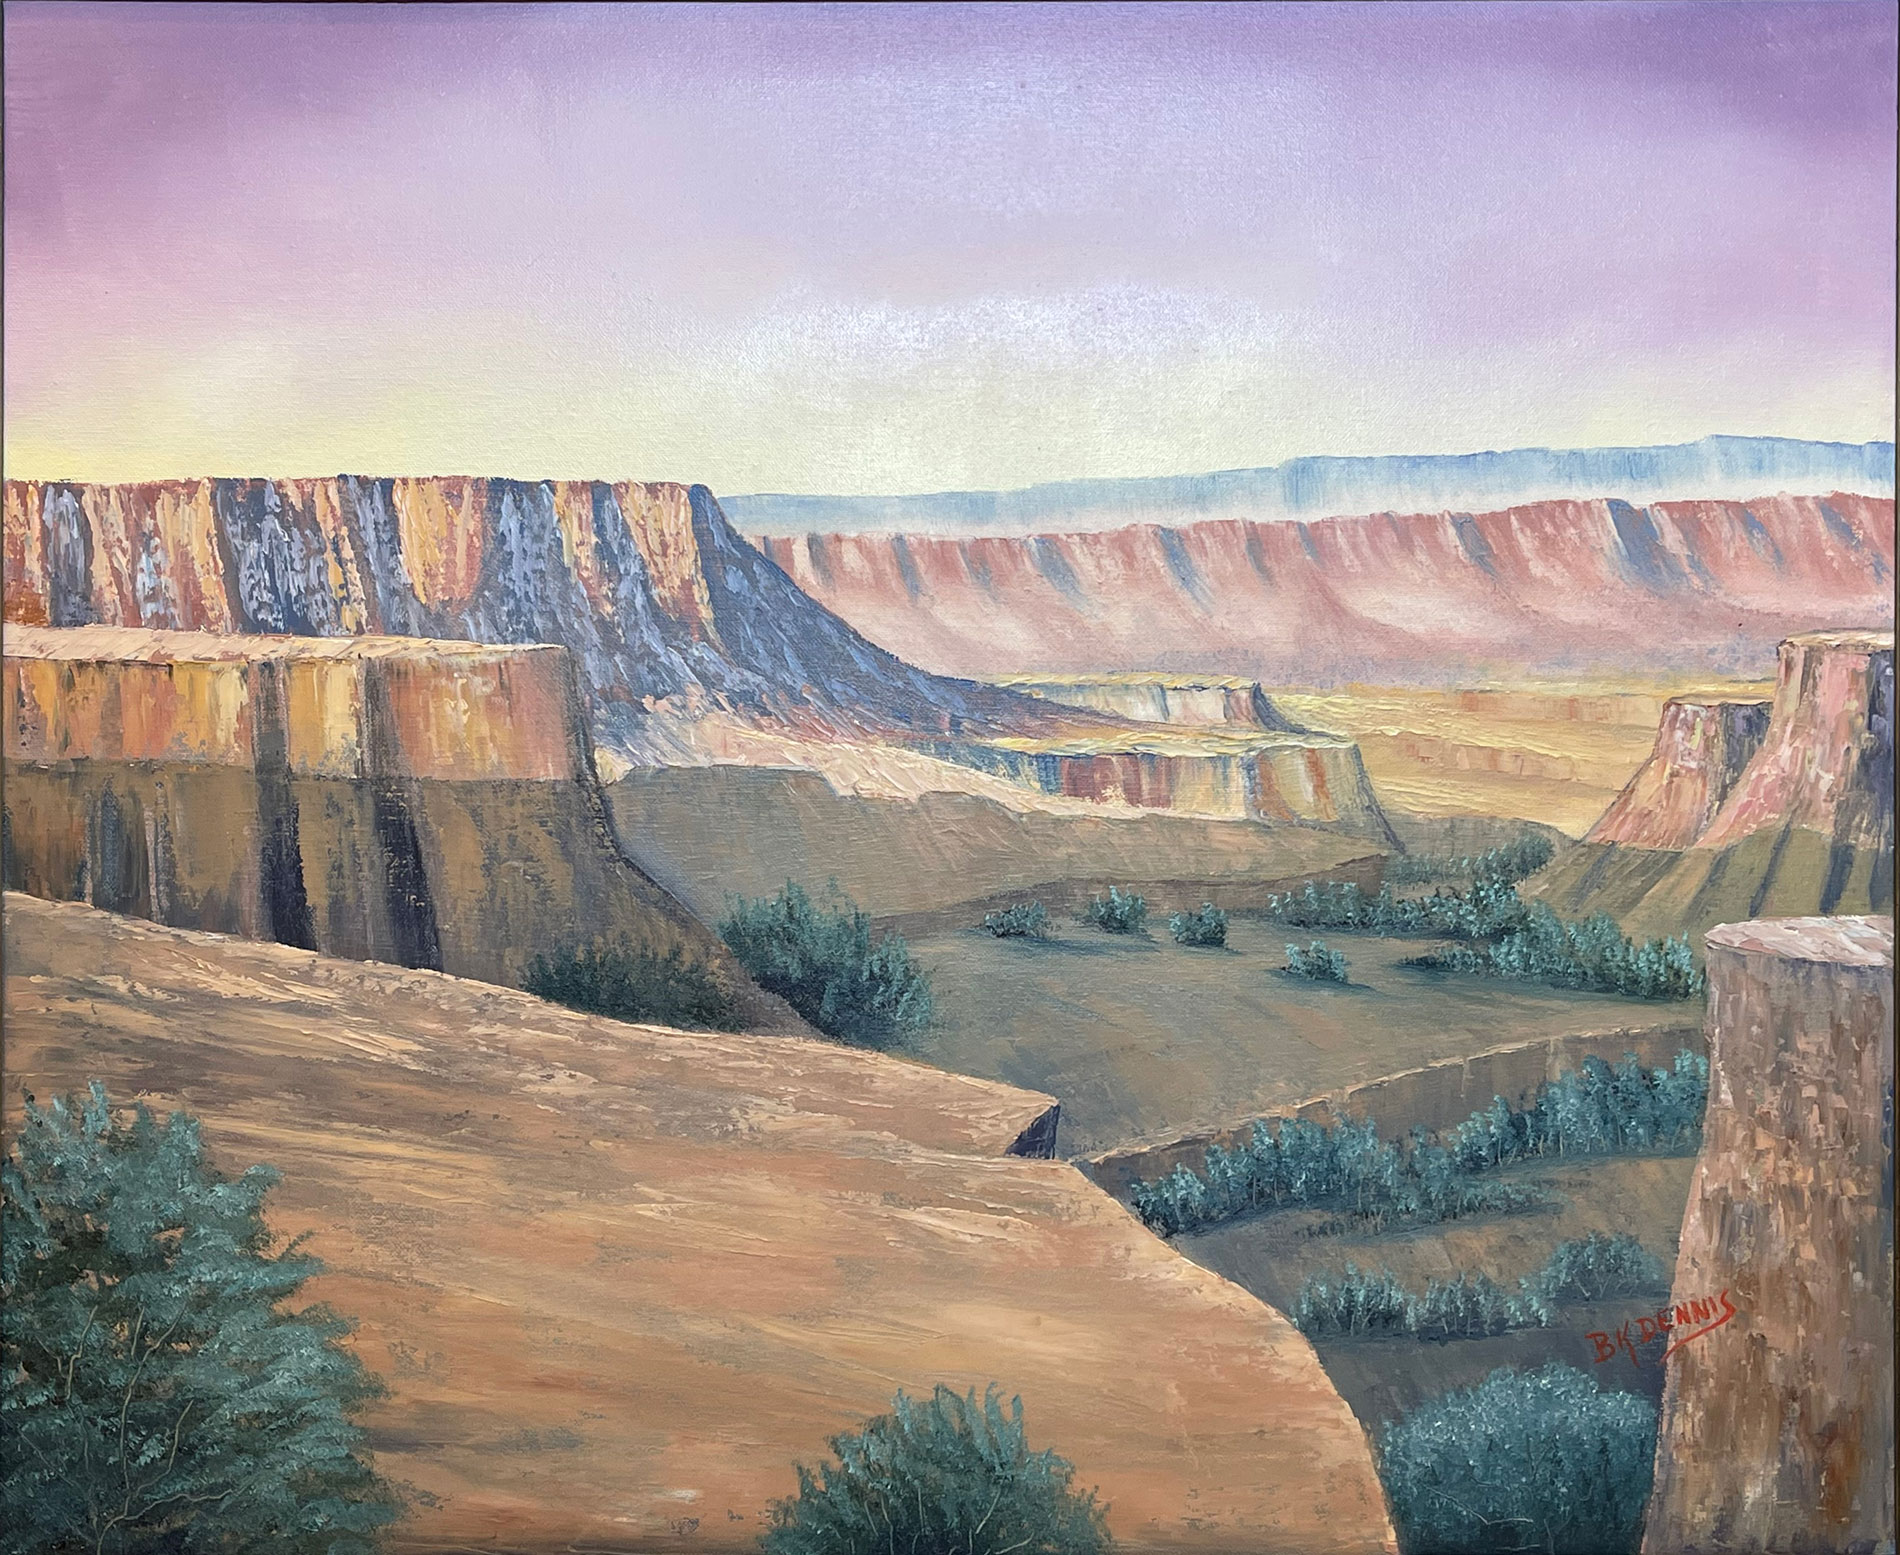 Oil Painting of a rugged canyon in Big Bend National Park with deep shadows. Painted by BK Dennis of Alpine, TX.